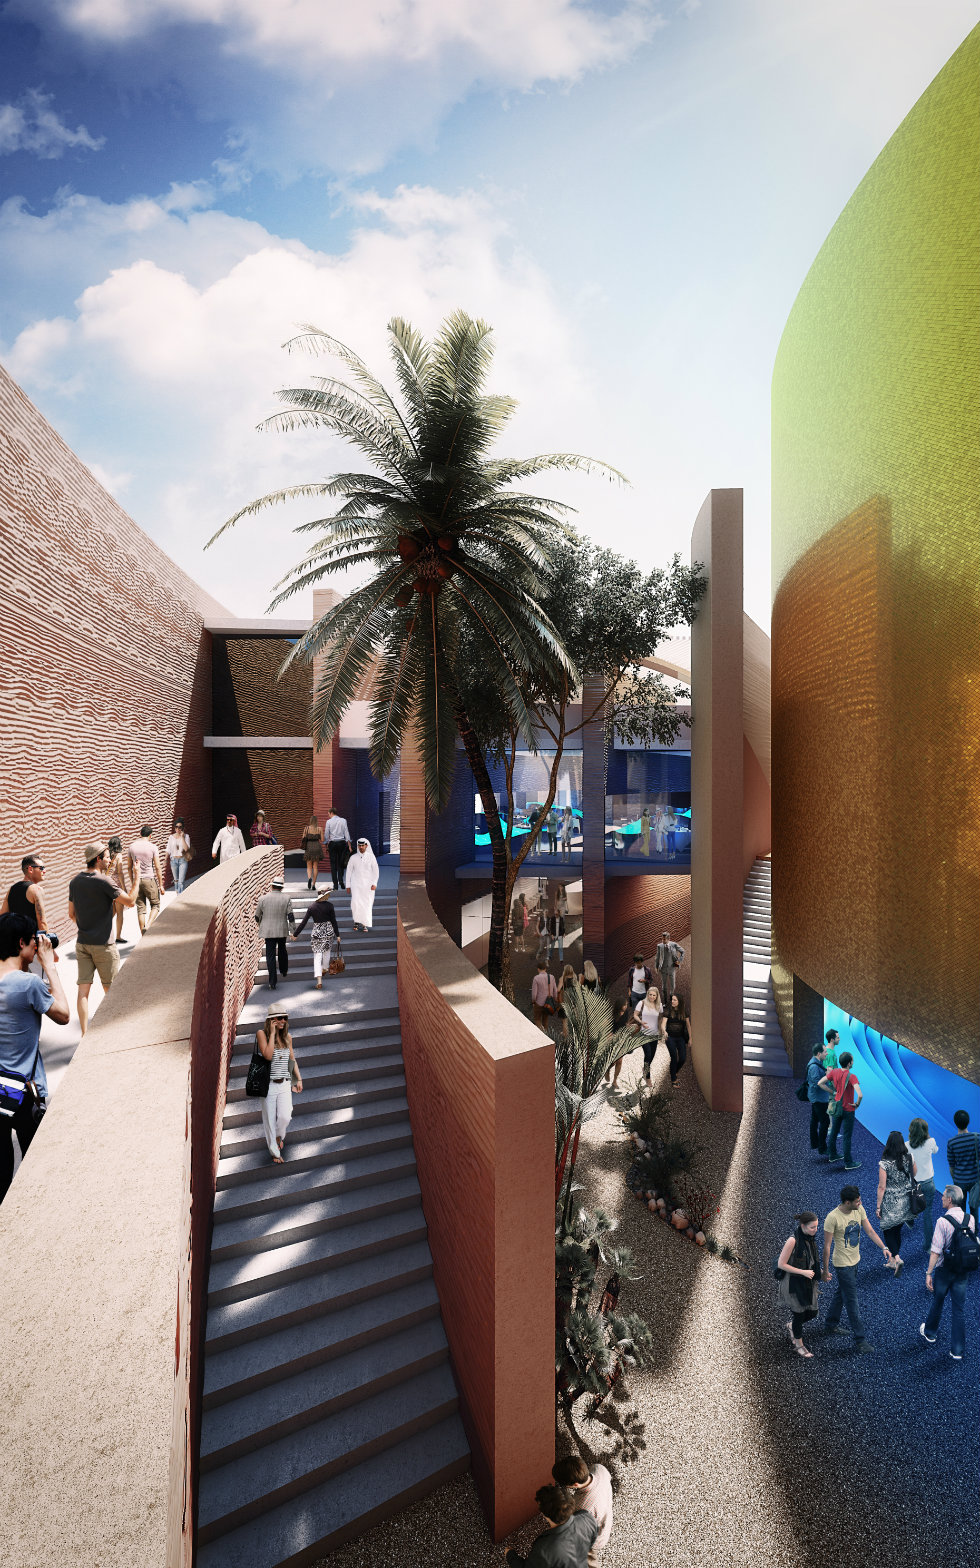 Milan Expo 2015 Foster and Partners designs UAE Pavillion